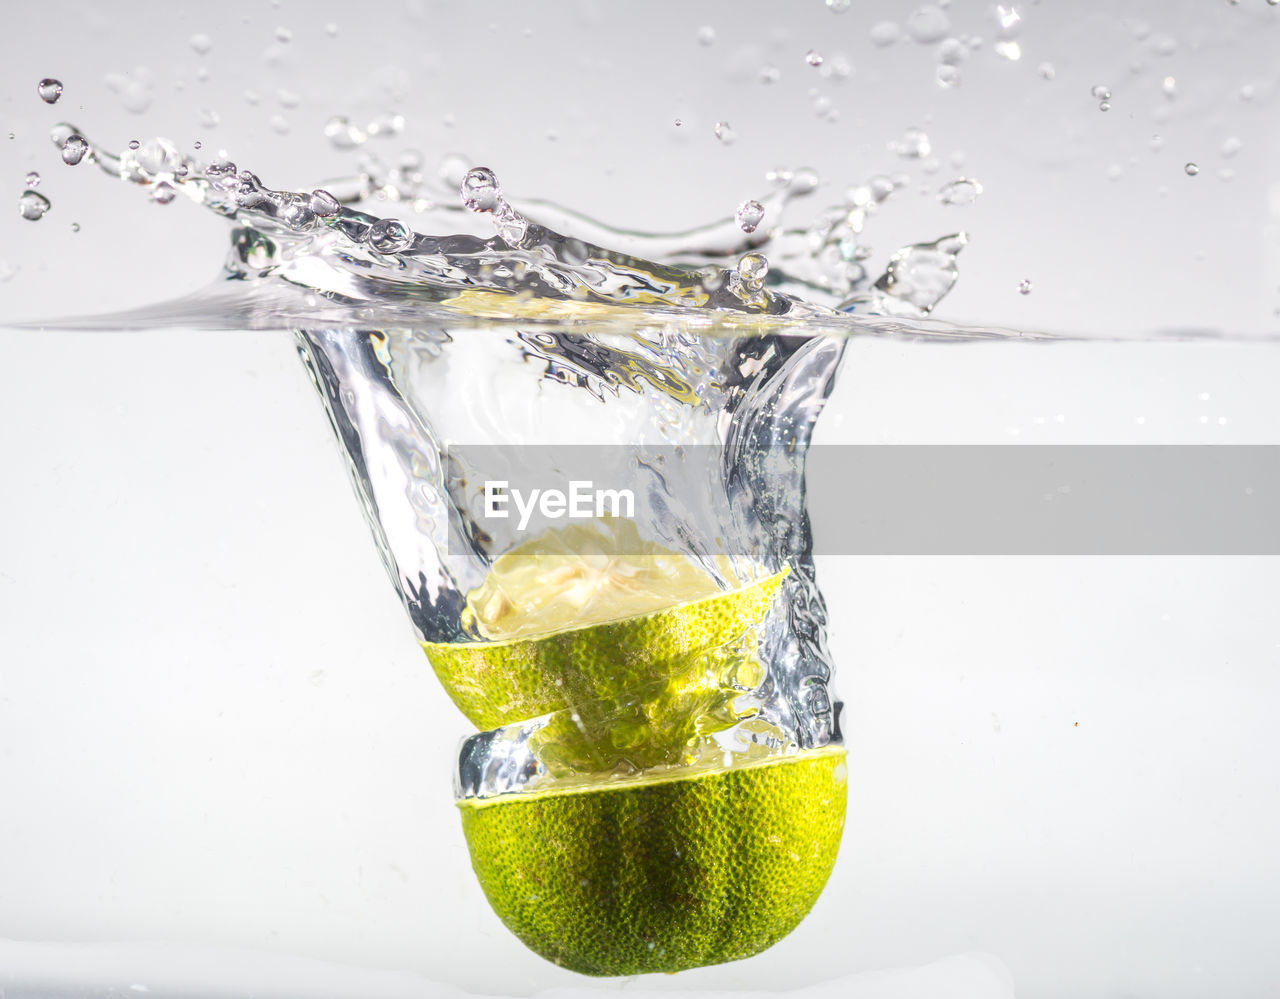 Close-up of limes drop into water splashing in glass against white background